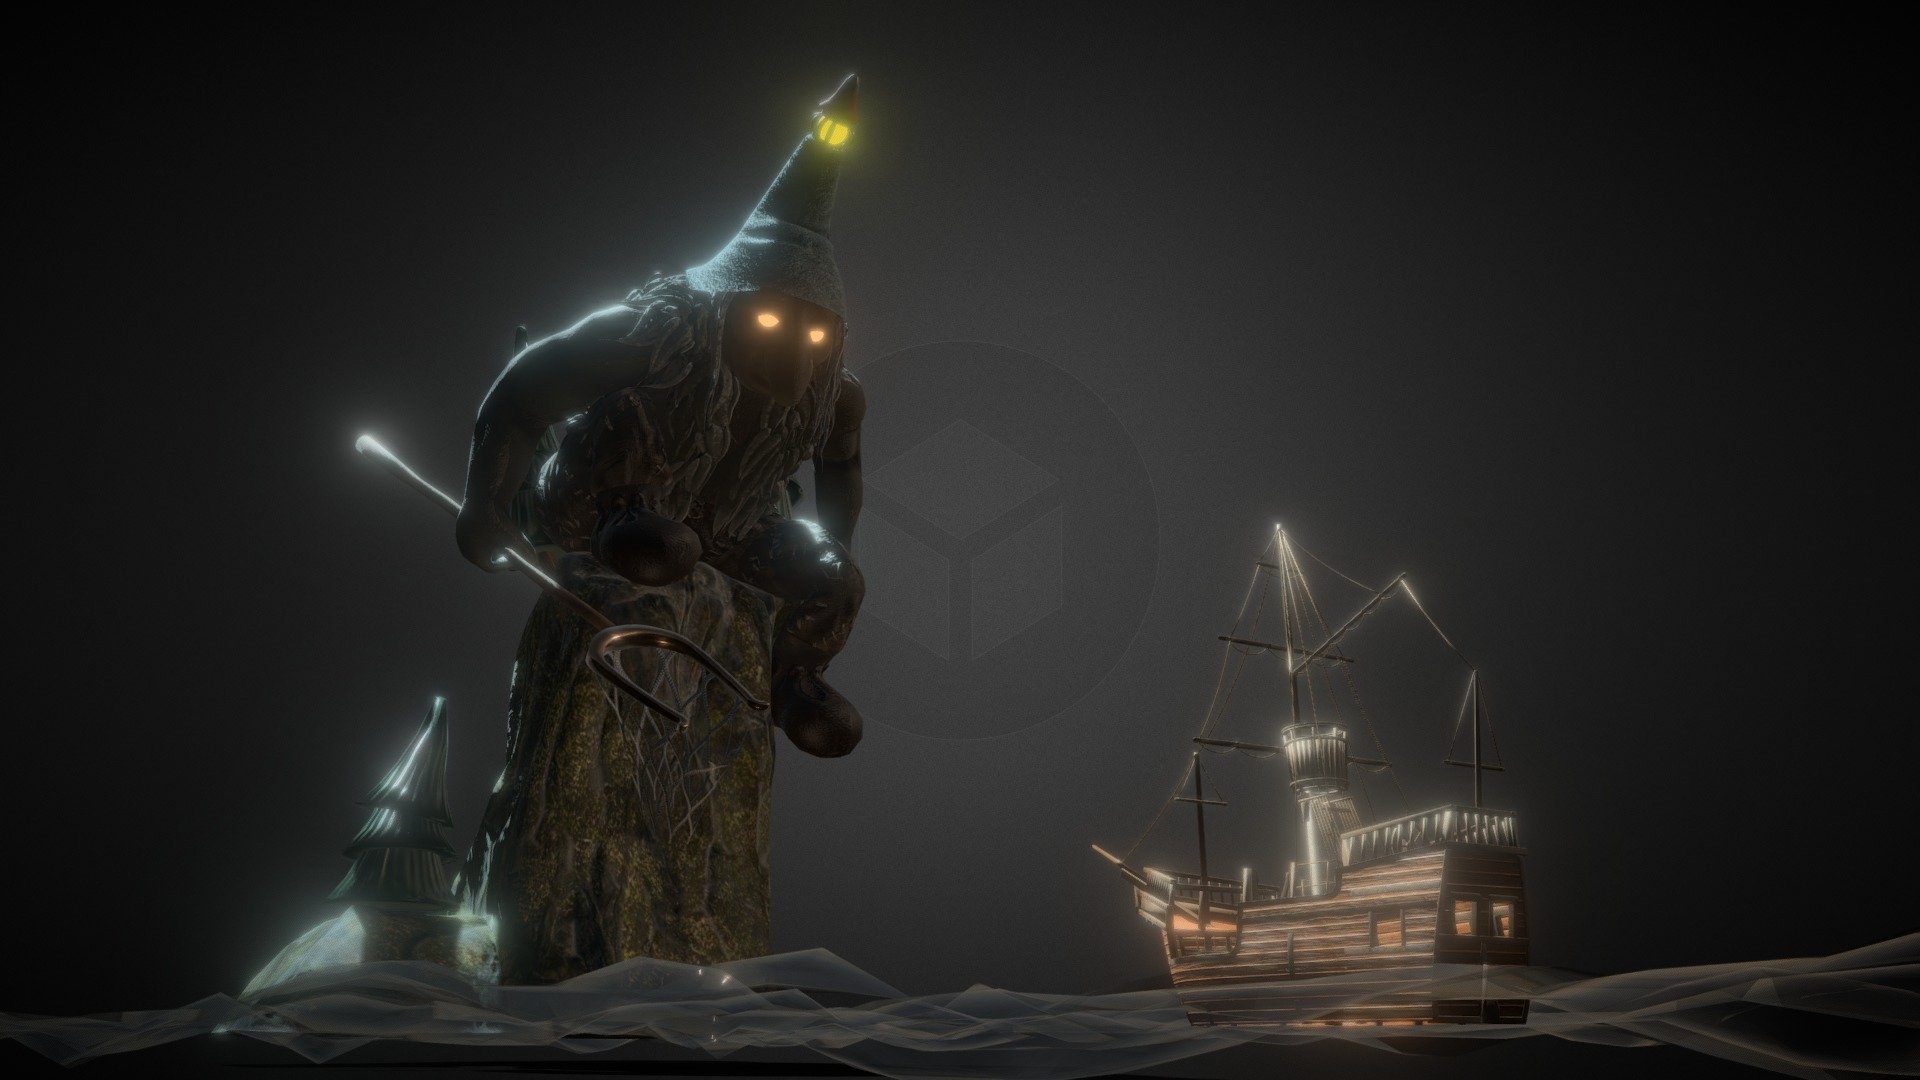 The insidious troll, pretending to be a lighthouse, lures gullible ships 3d model